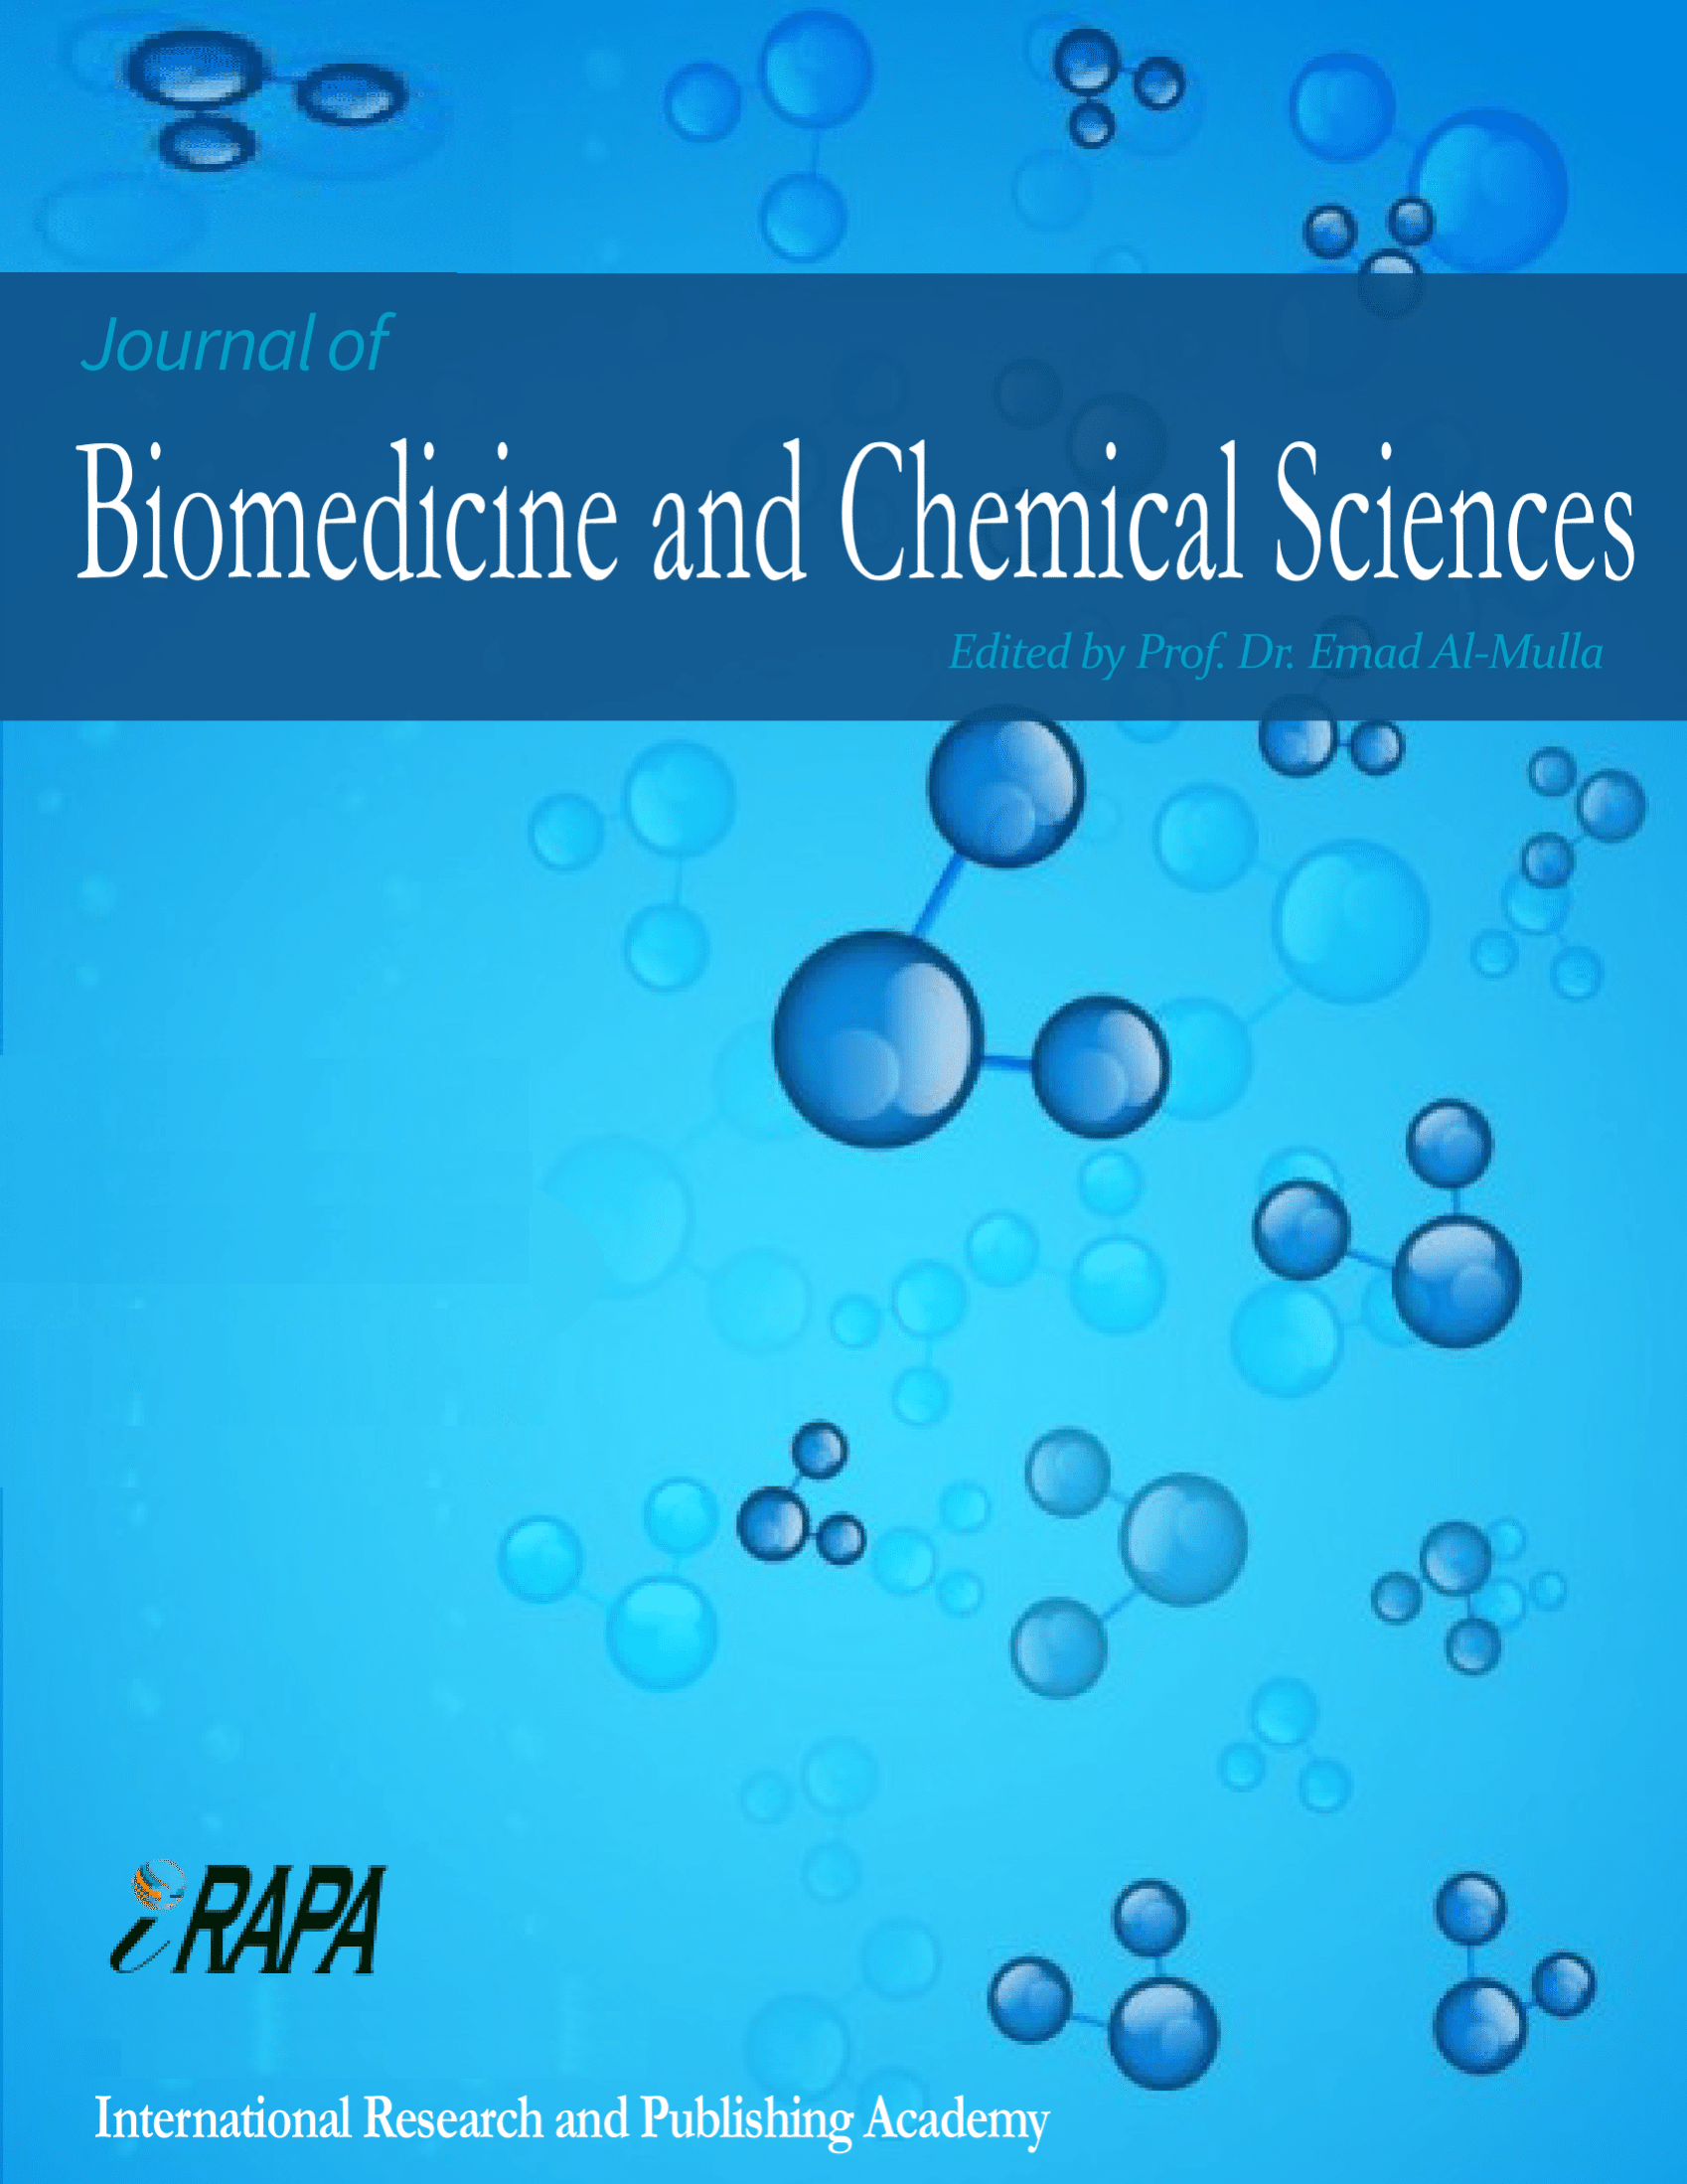 Biomedicine and Chemical Sciences